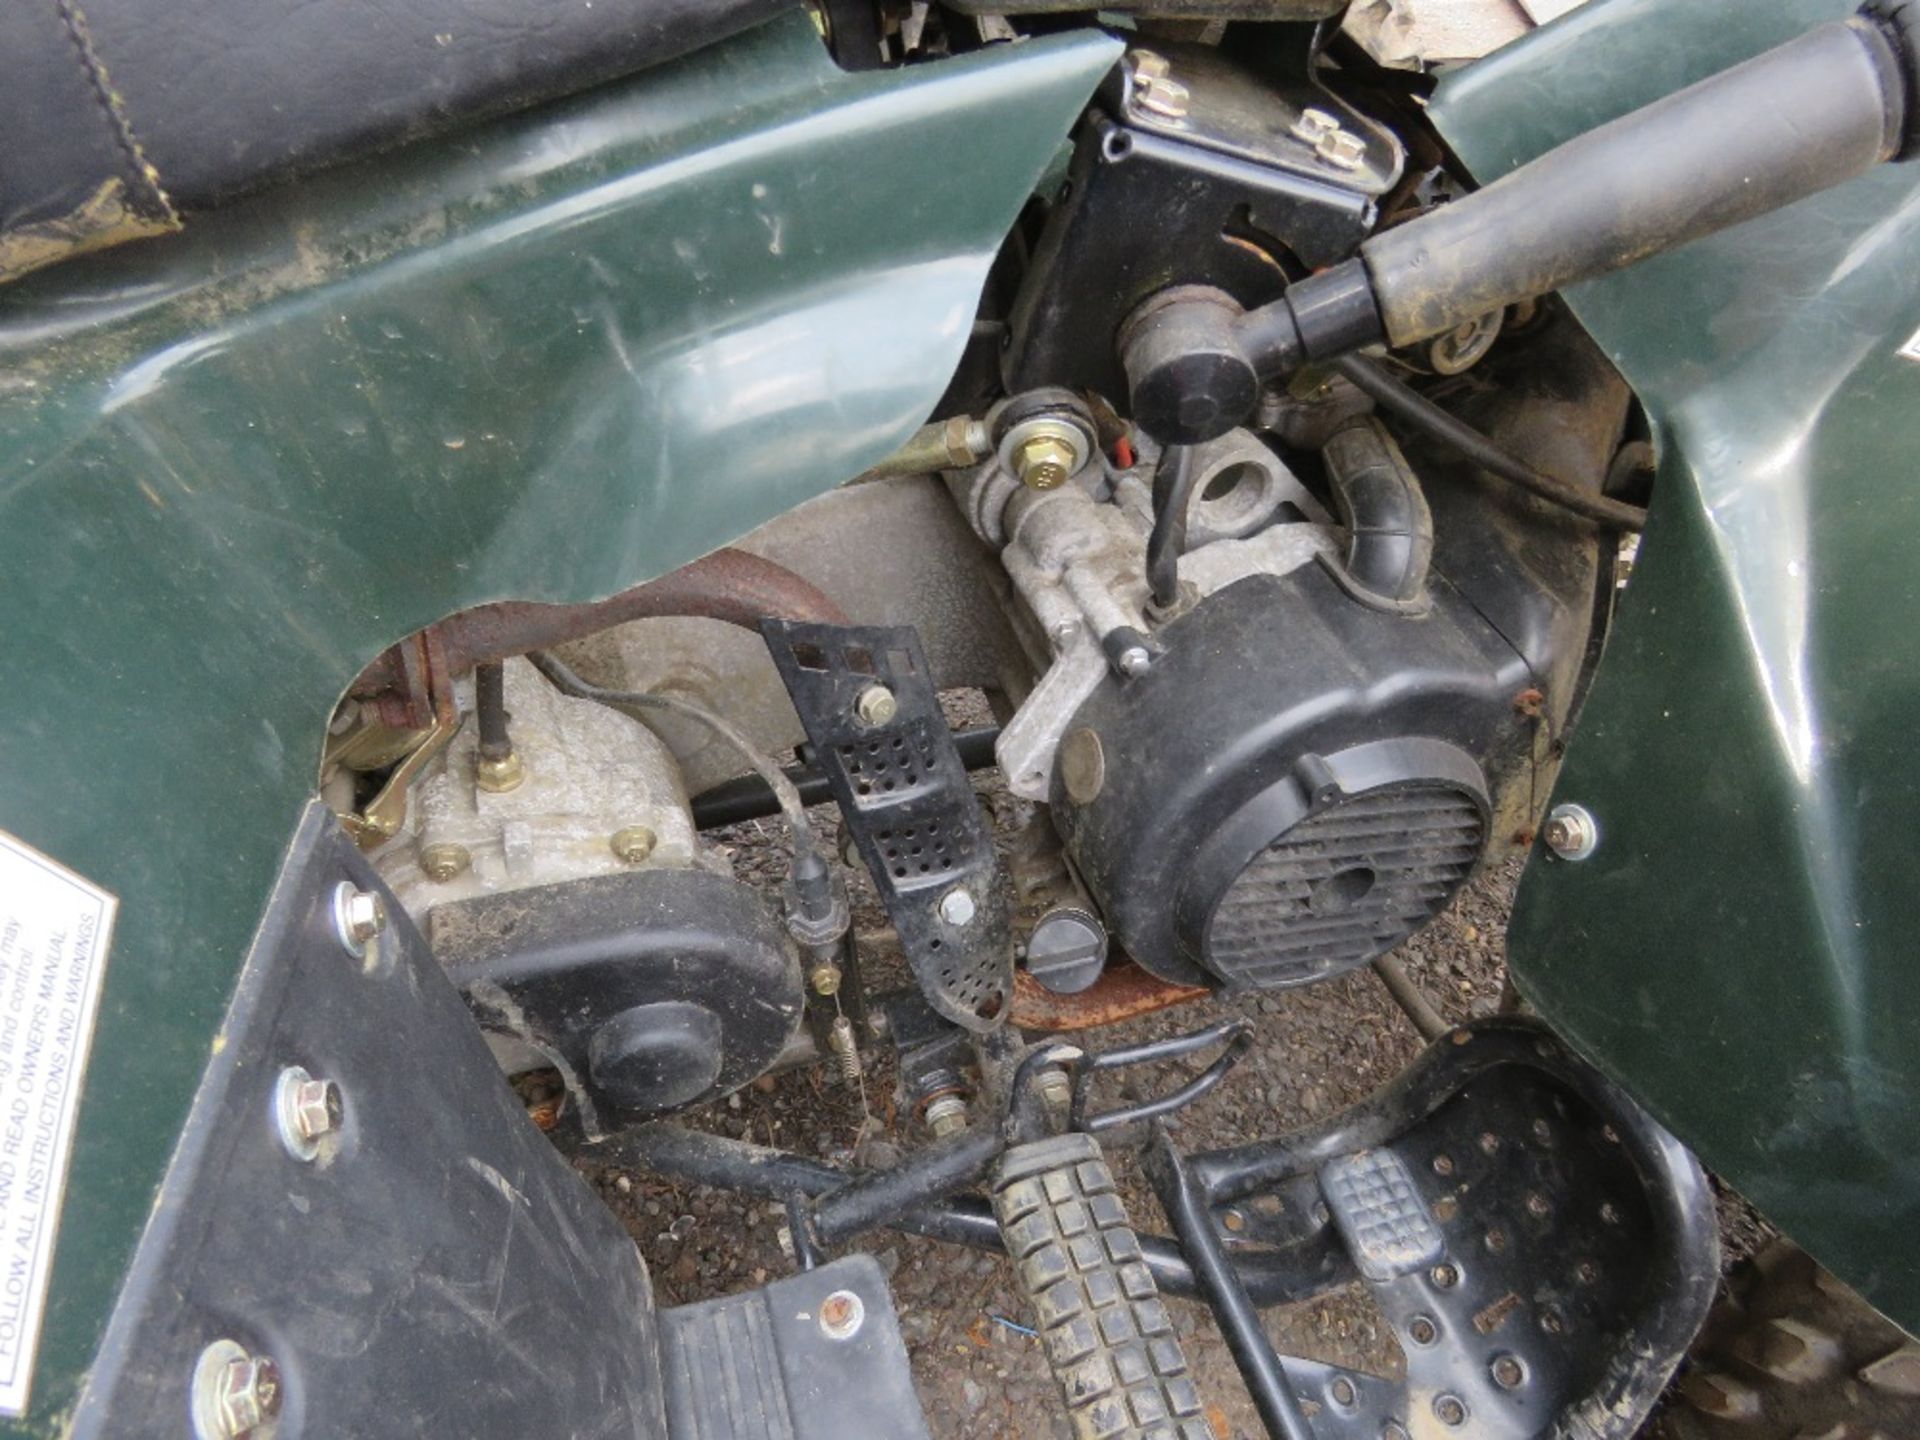 KAZUMA 2WD PETROL ENGINED QUAD BIKE, CONDITION UNKNOWN, SOLD AS NON RUNNER. - Image 5 of 6